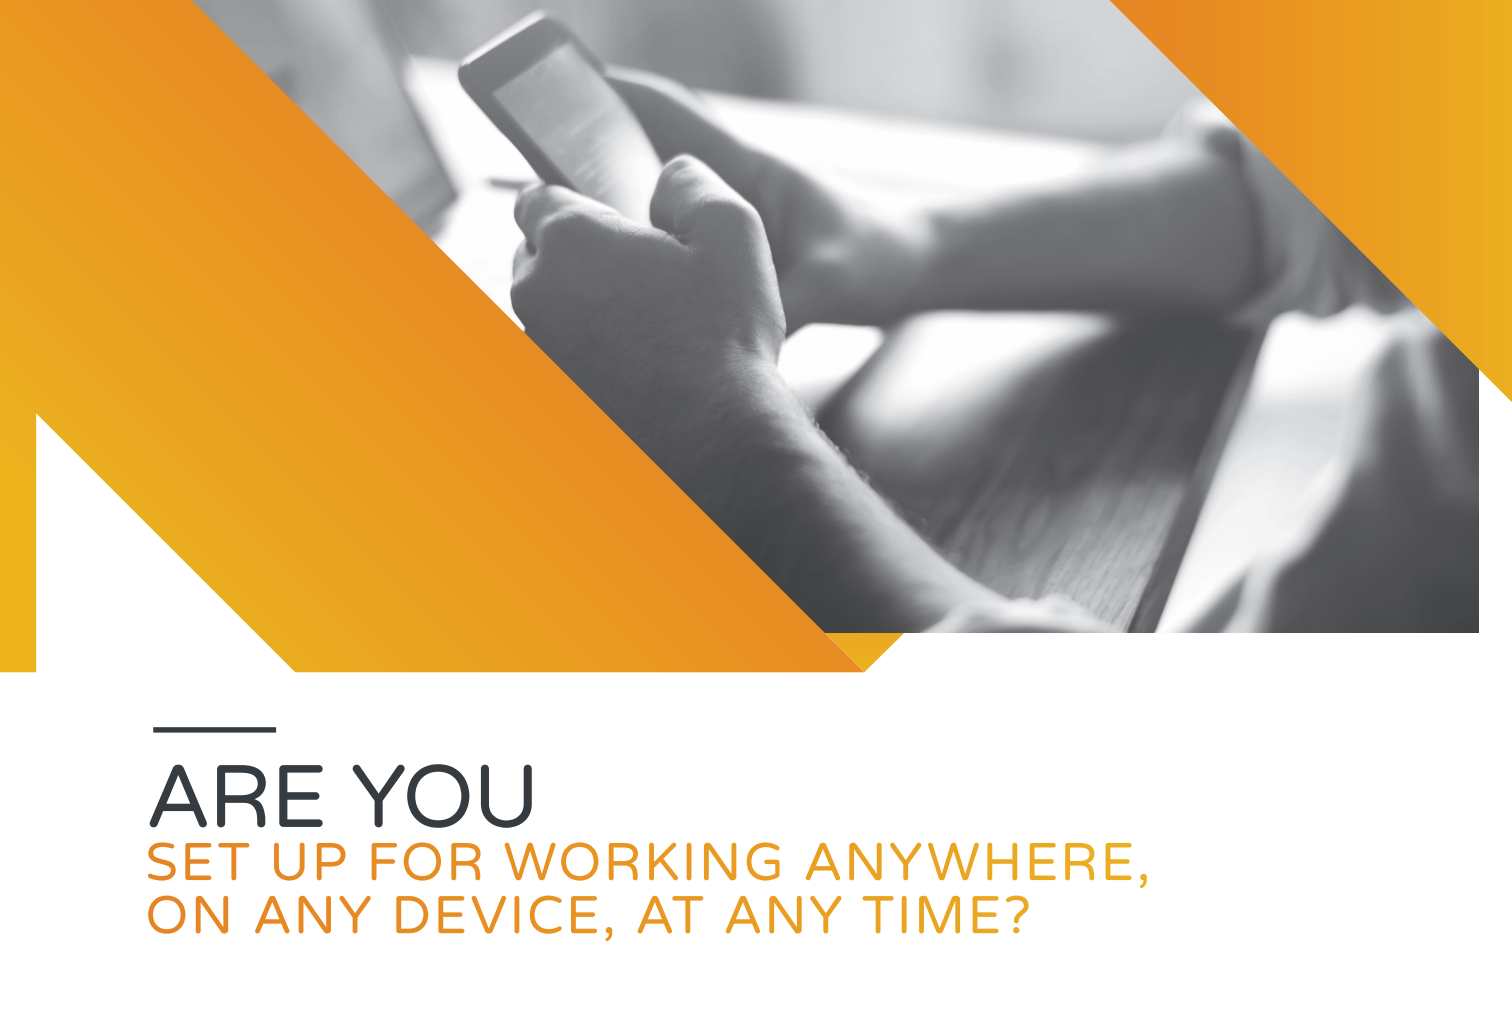 Work on any device, anywhere, any time